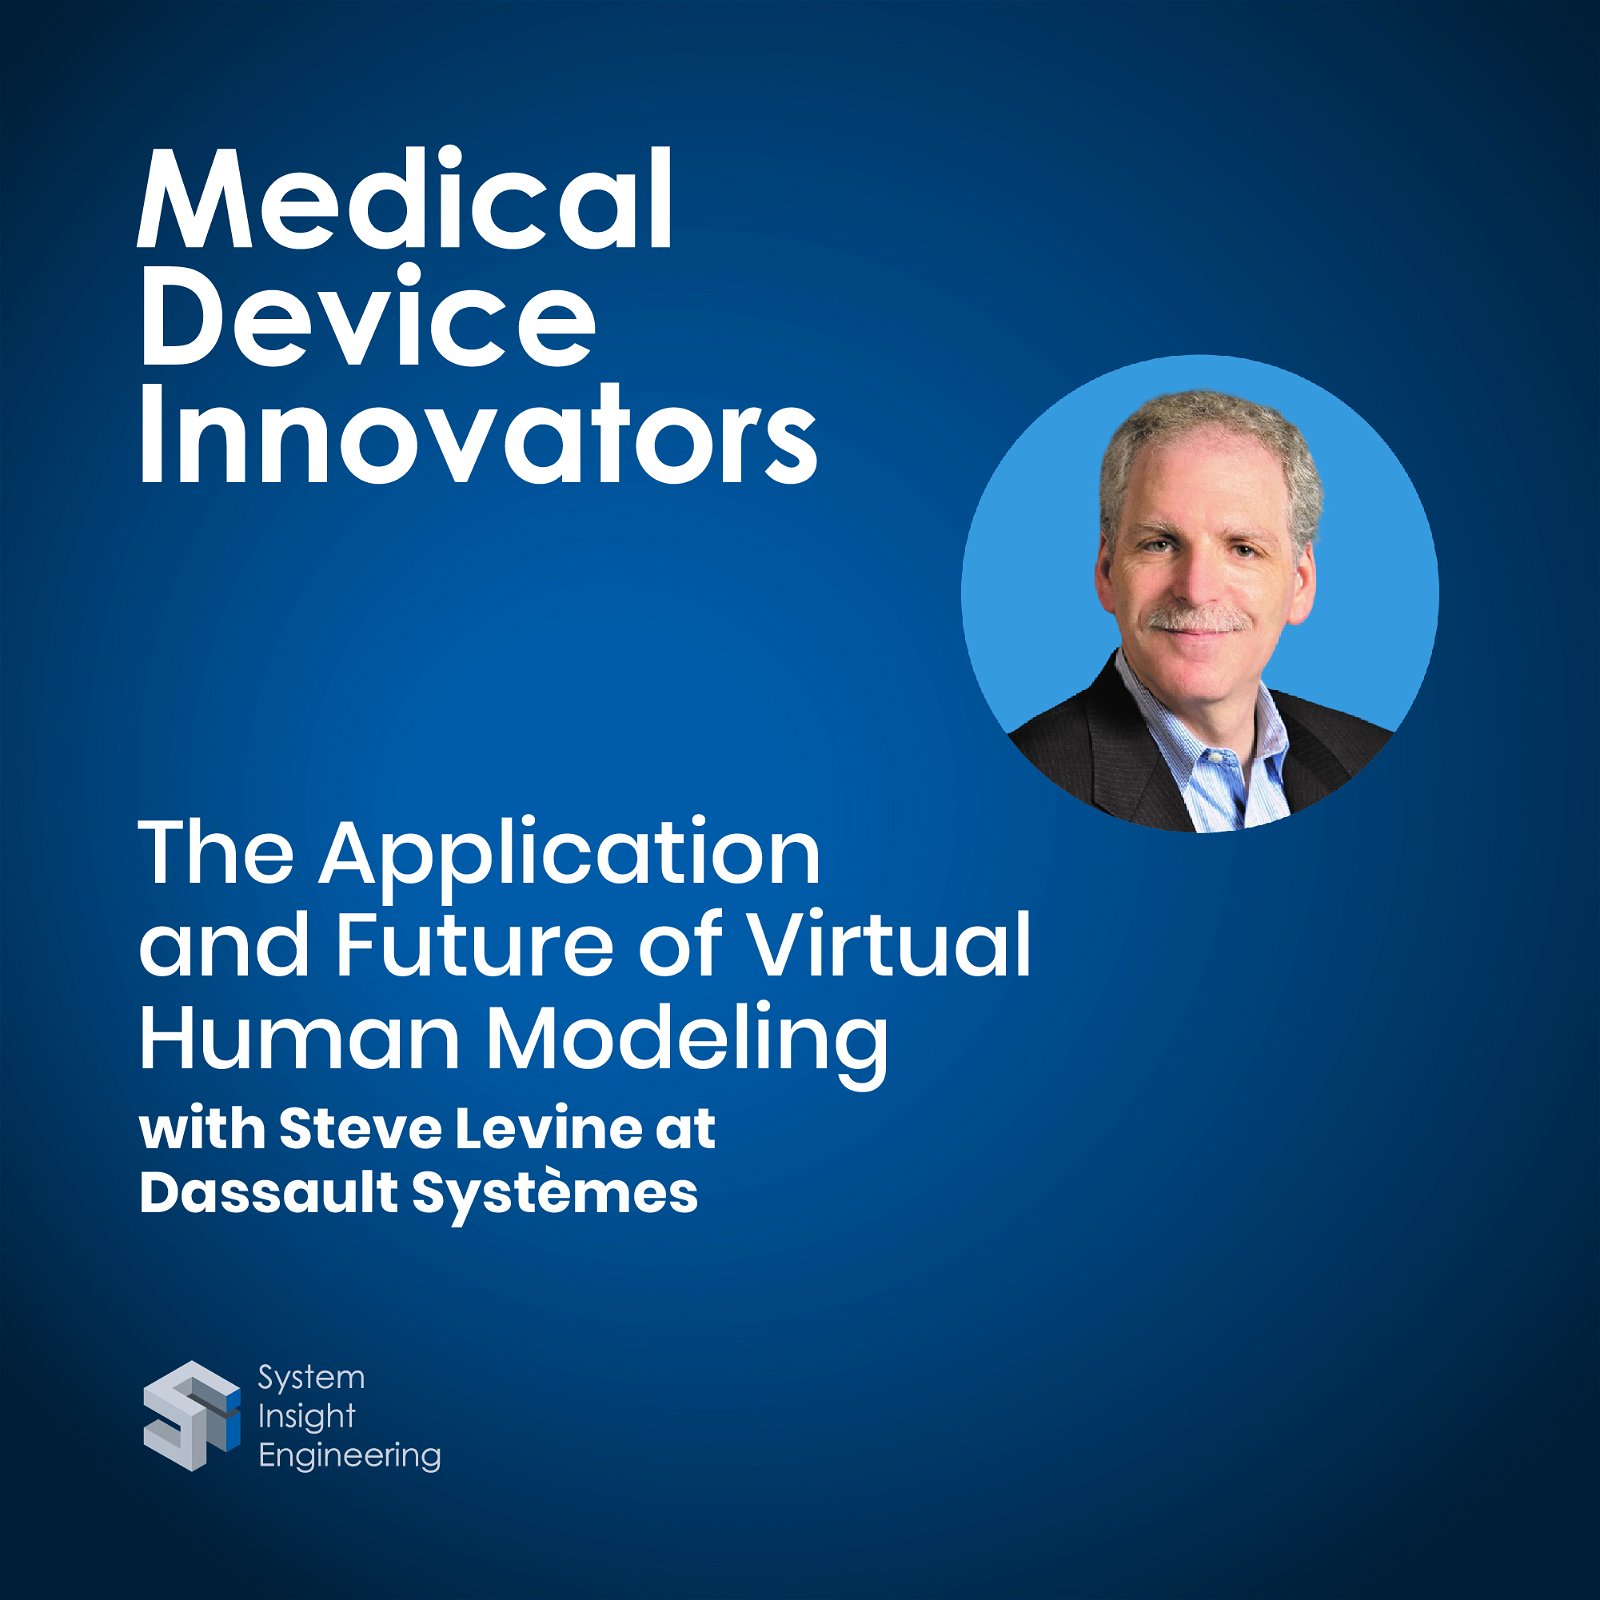 The Application and Future of Virtual Human Modeling with Steve Levine at Dassault Systèmes